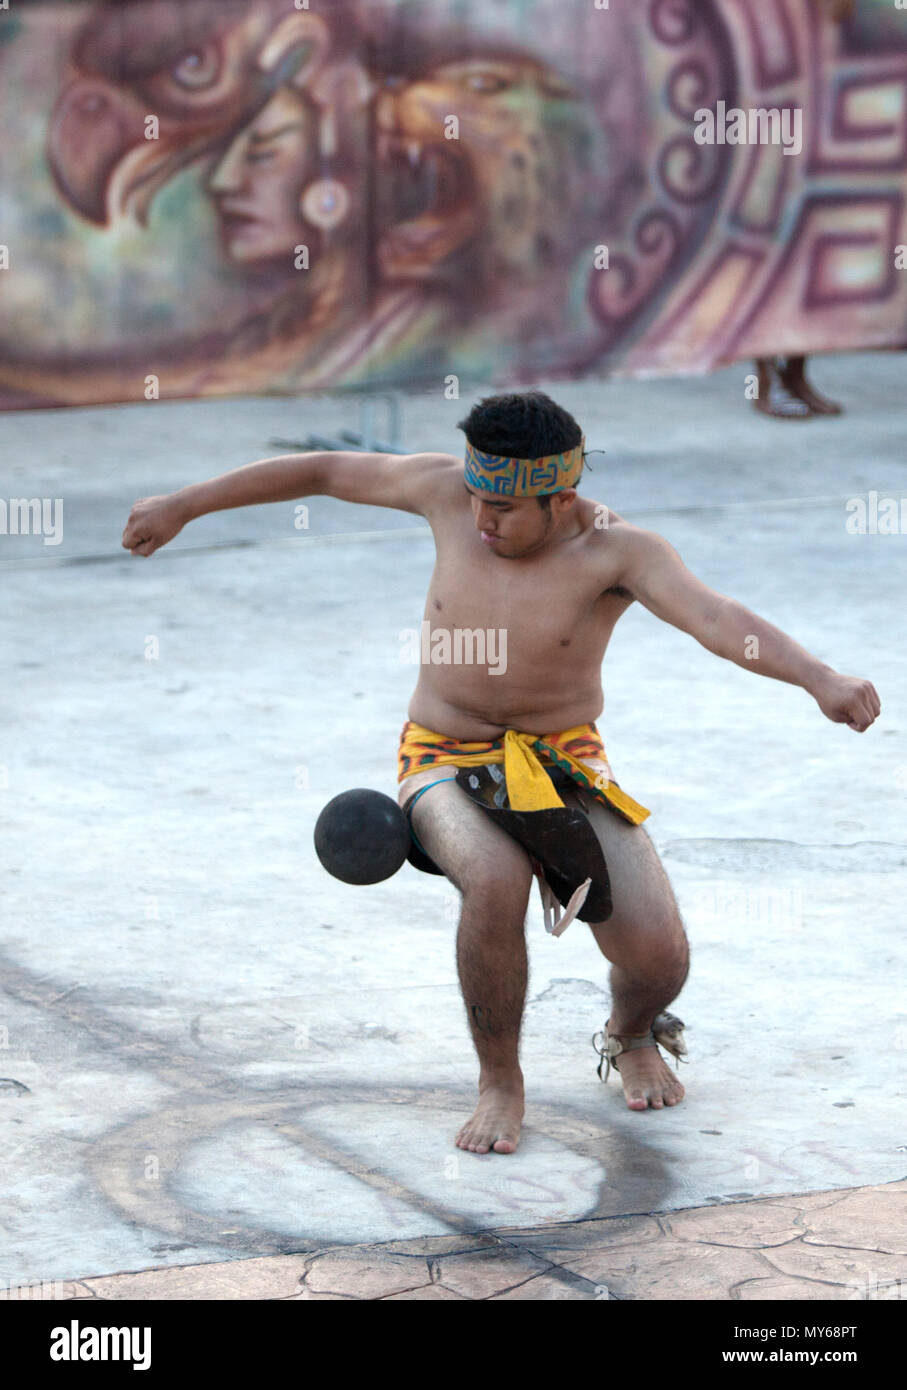 A Mayan Ball Player from Chapab de las Flores team hits the ball with his hip during the first ¬Pok Ta Pok¬ World Cup in Piste, Tinum, Yucatan, Mexico Stock Photo